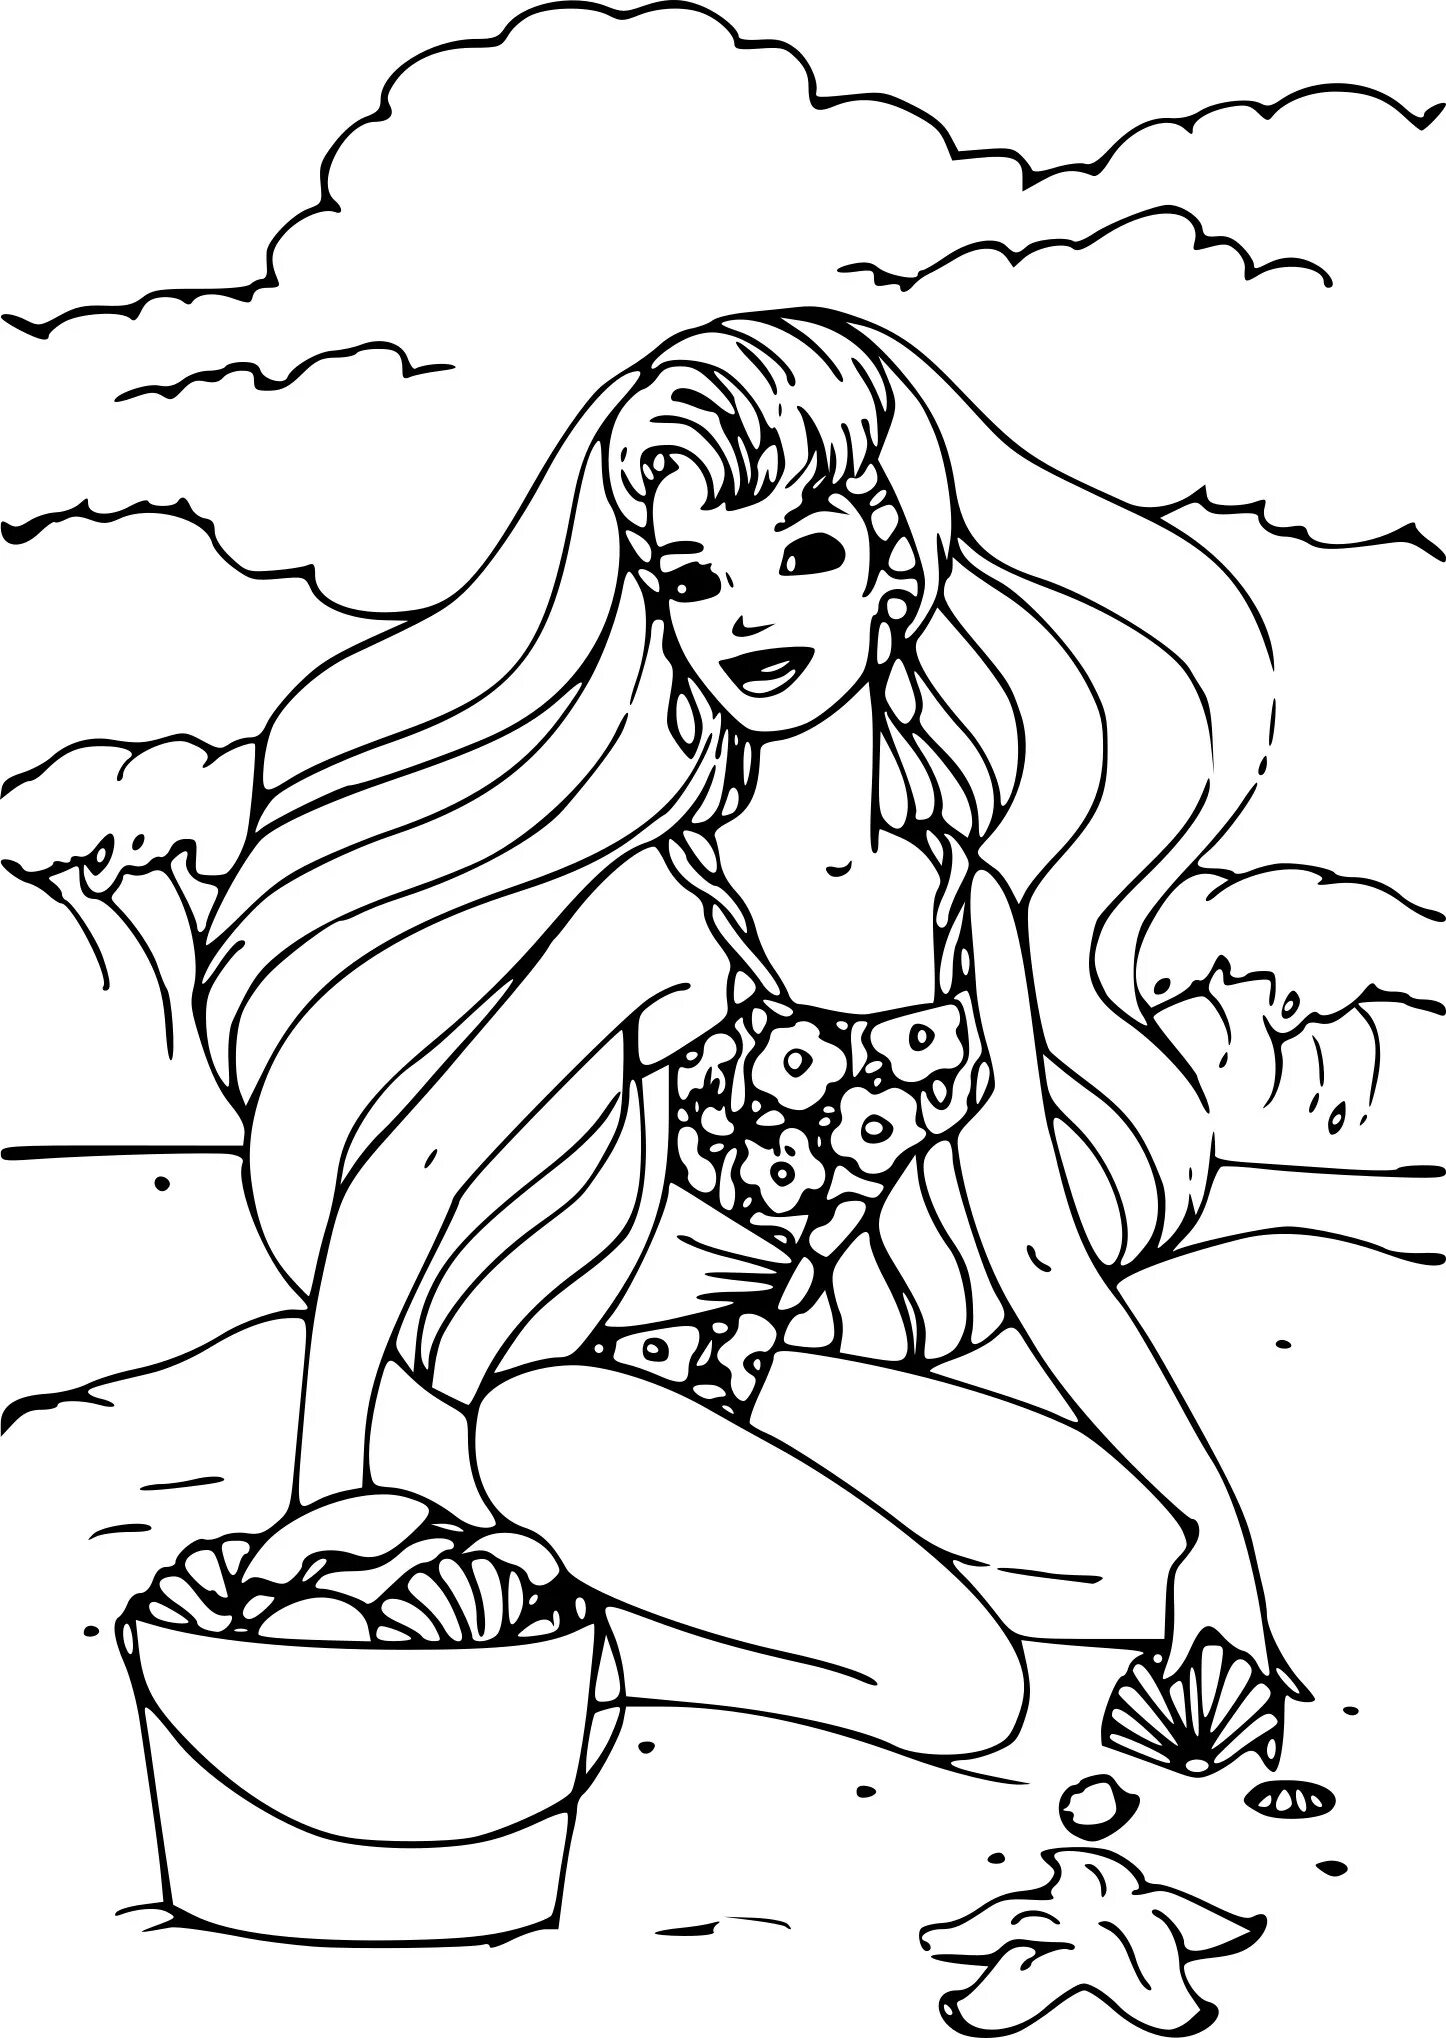 Timeless 2000s coloring book